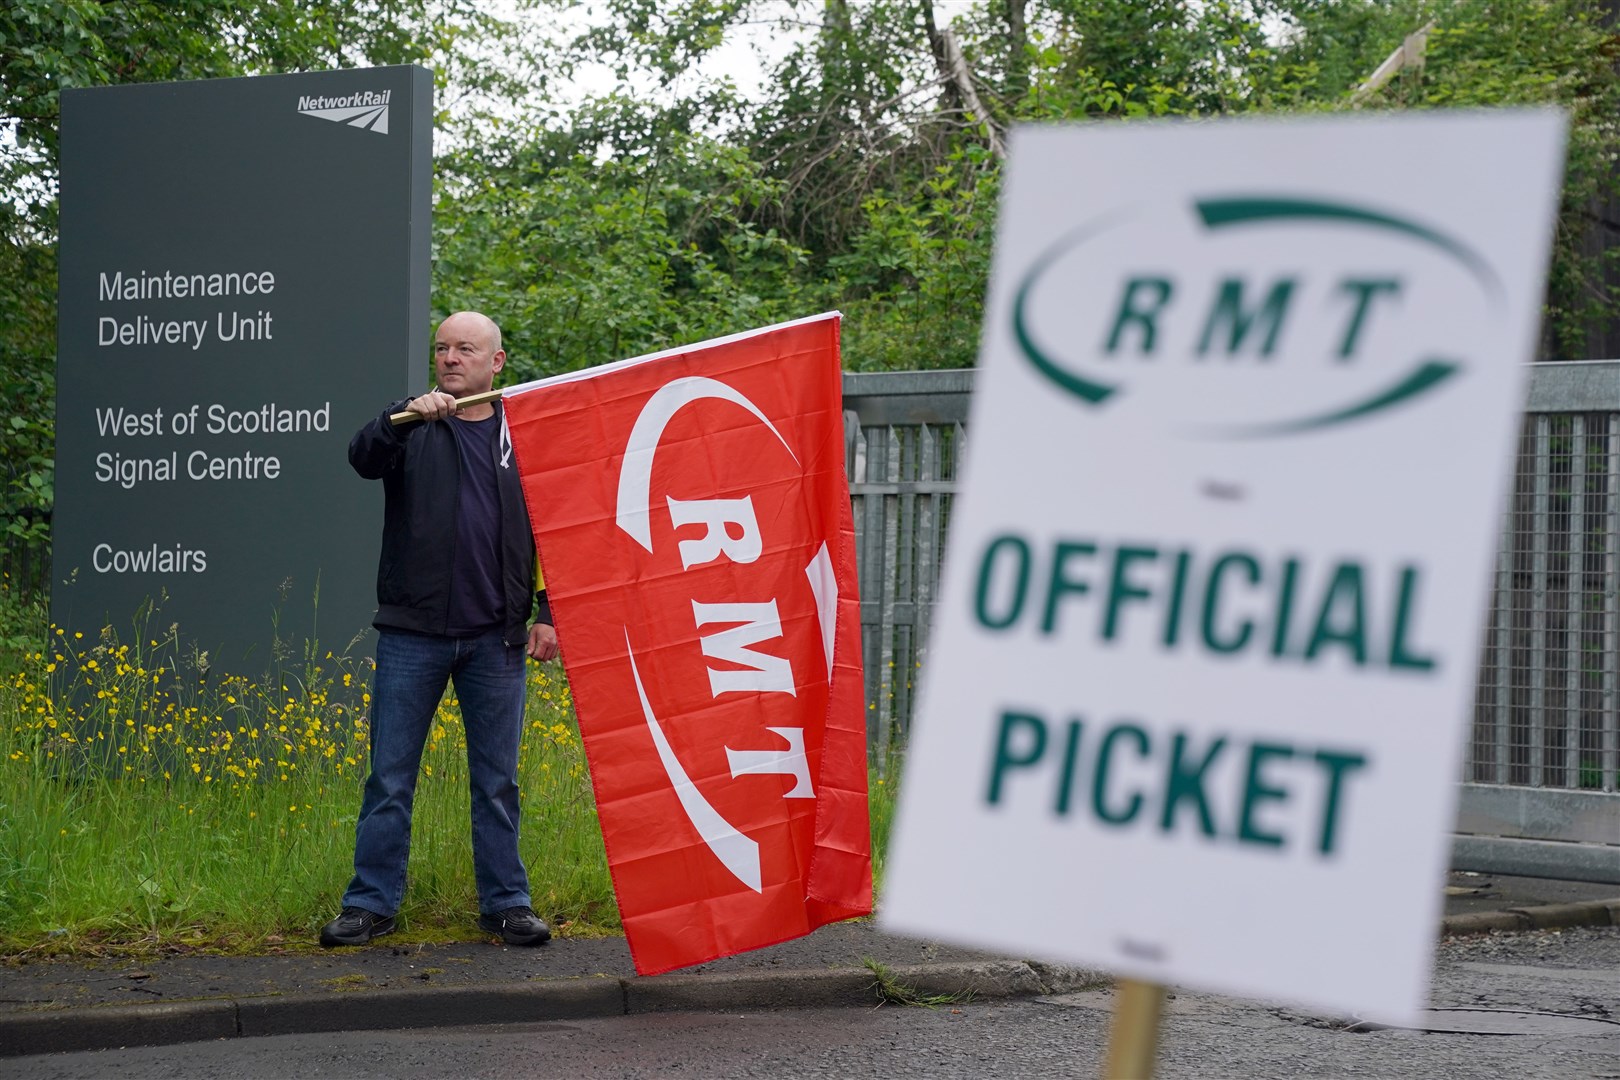 A picket line outside the Network Rail Maintenance Delivery Unit and West of Scotland Signal Centre in Cowlairs, Glasgow (Andrew Milligan/PA)